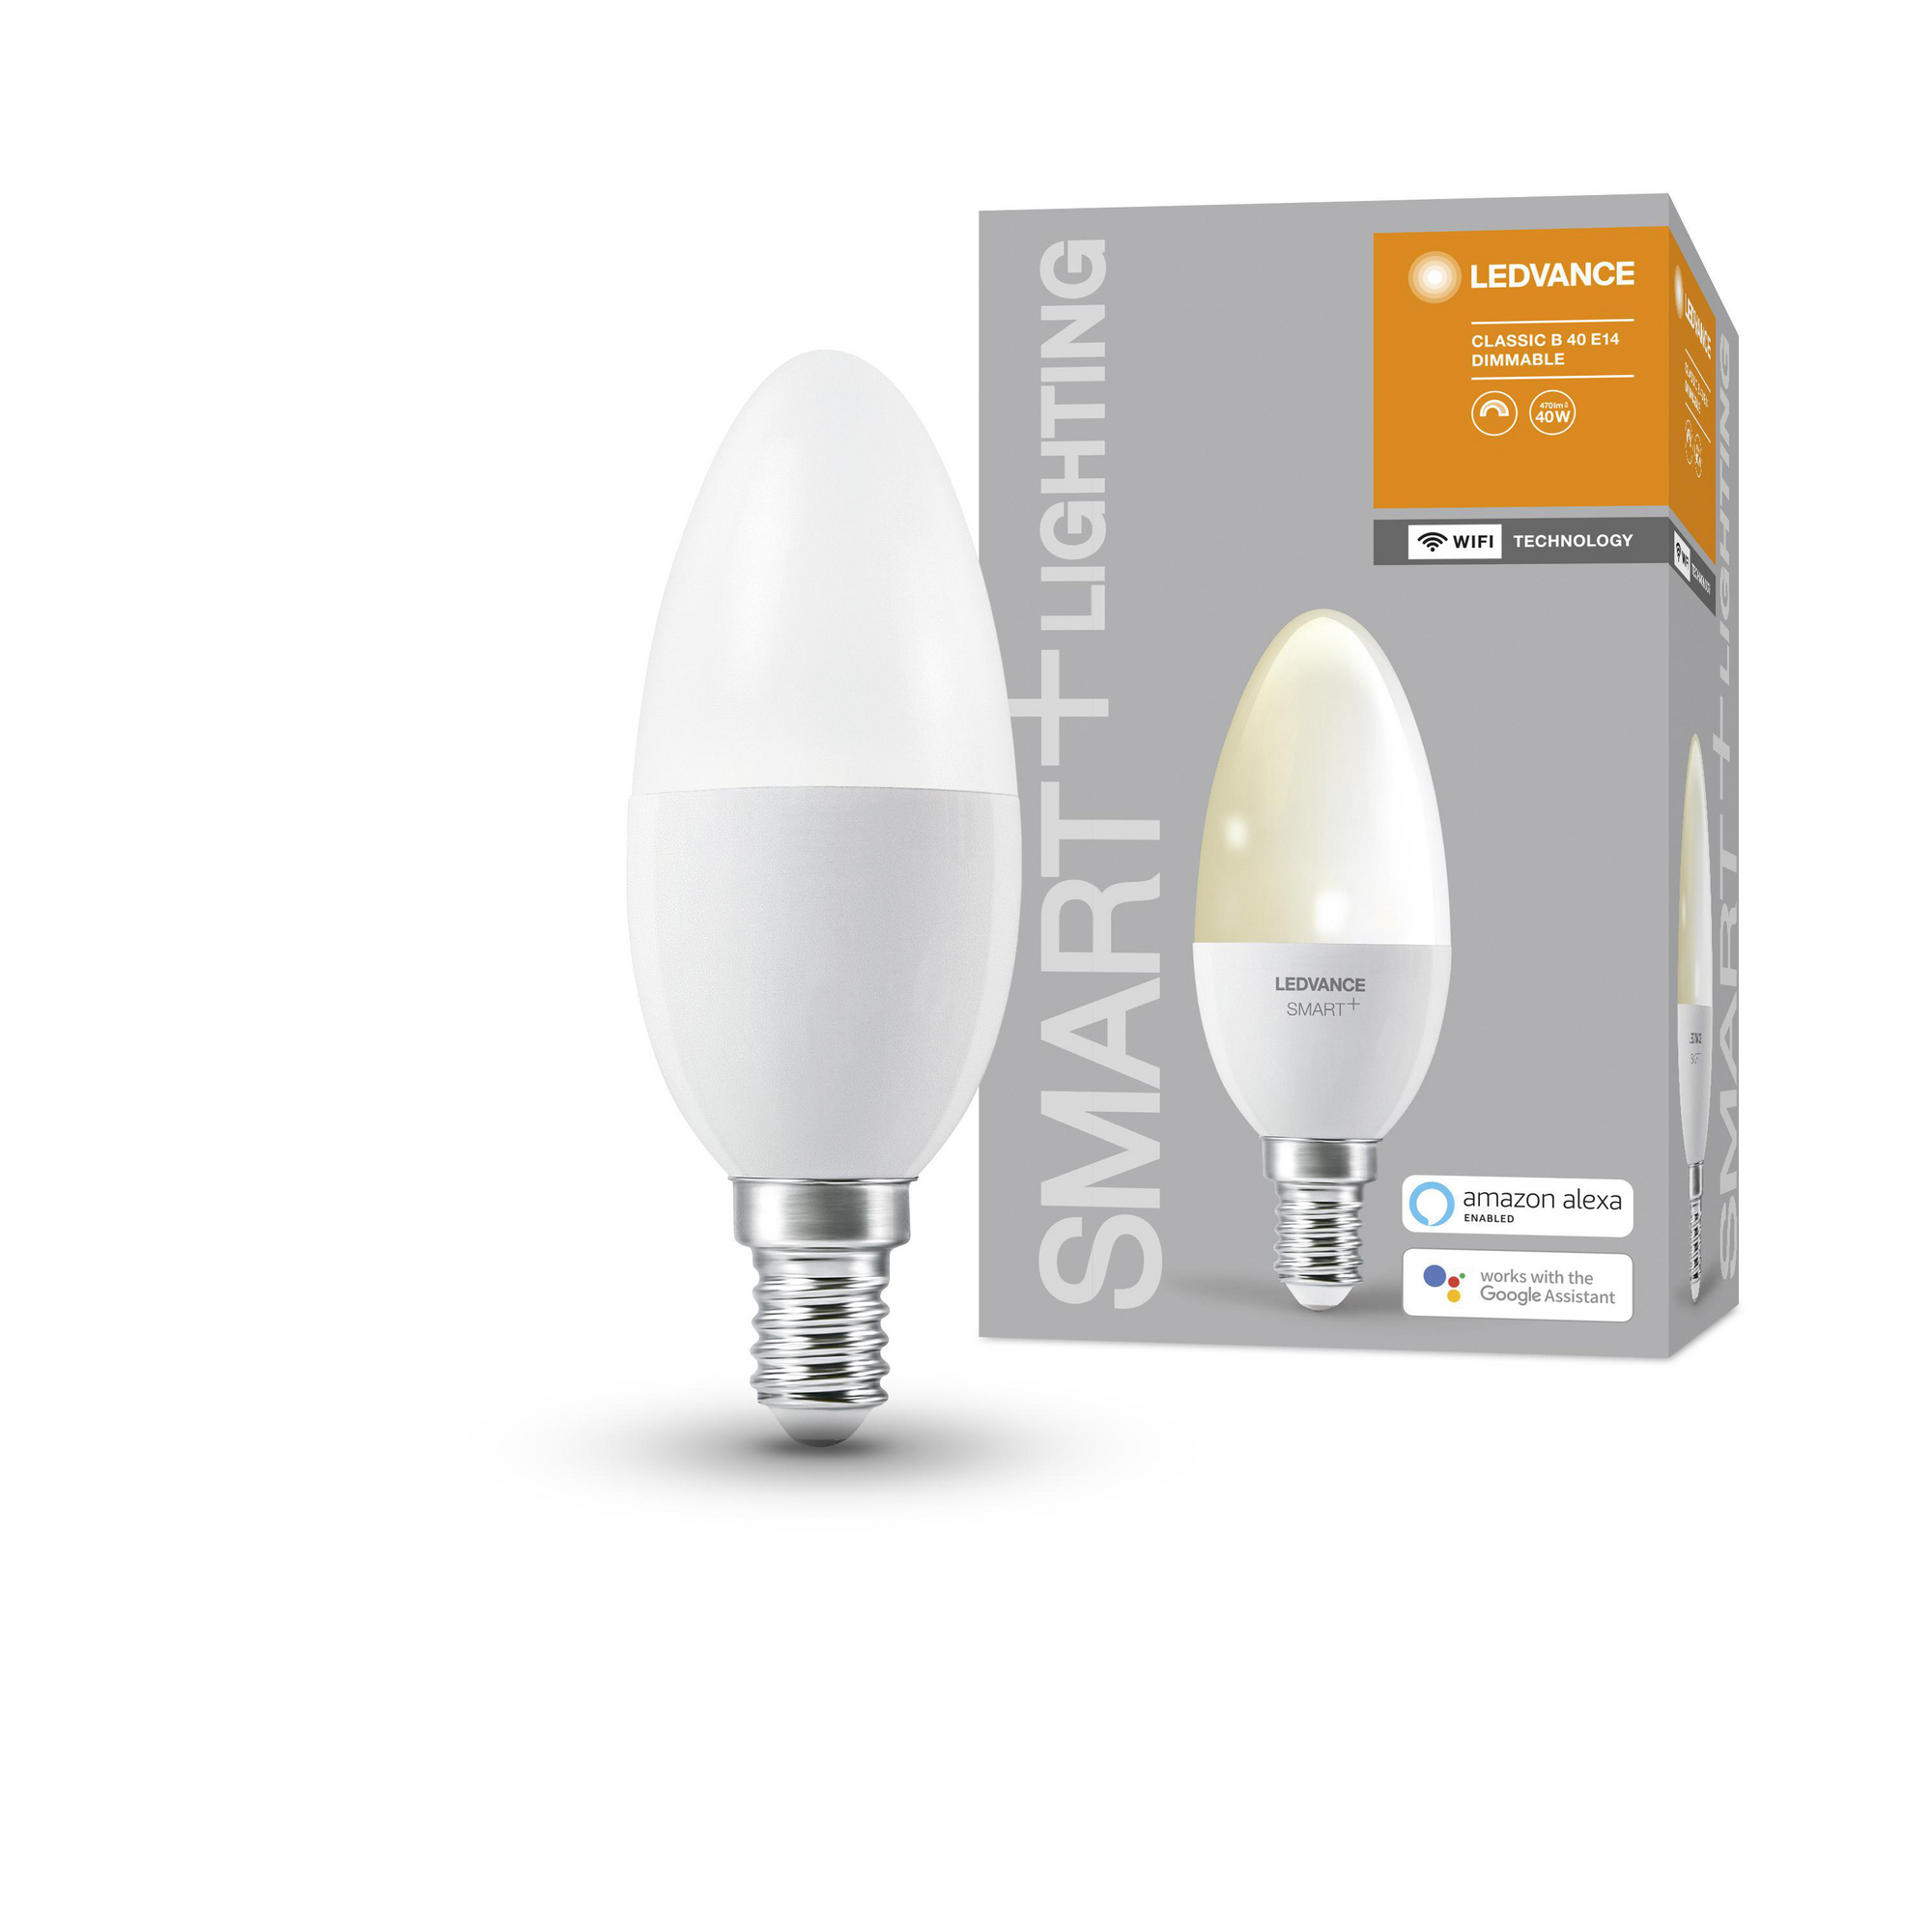 LED-Lampe 'Smart+' 10,7 cm 470 lm 5 W E14 weiß WLAN + product picture